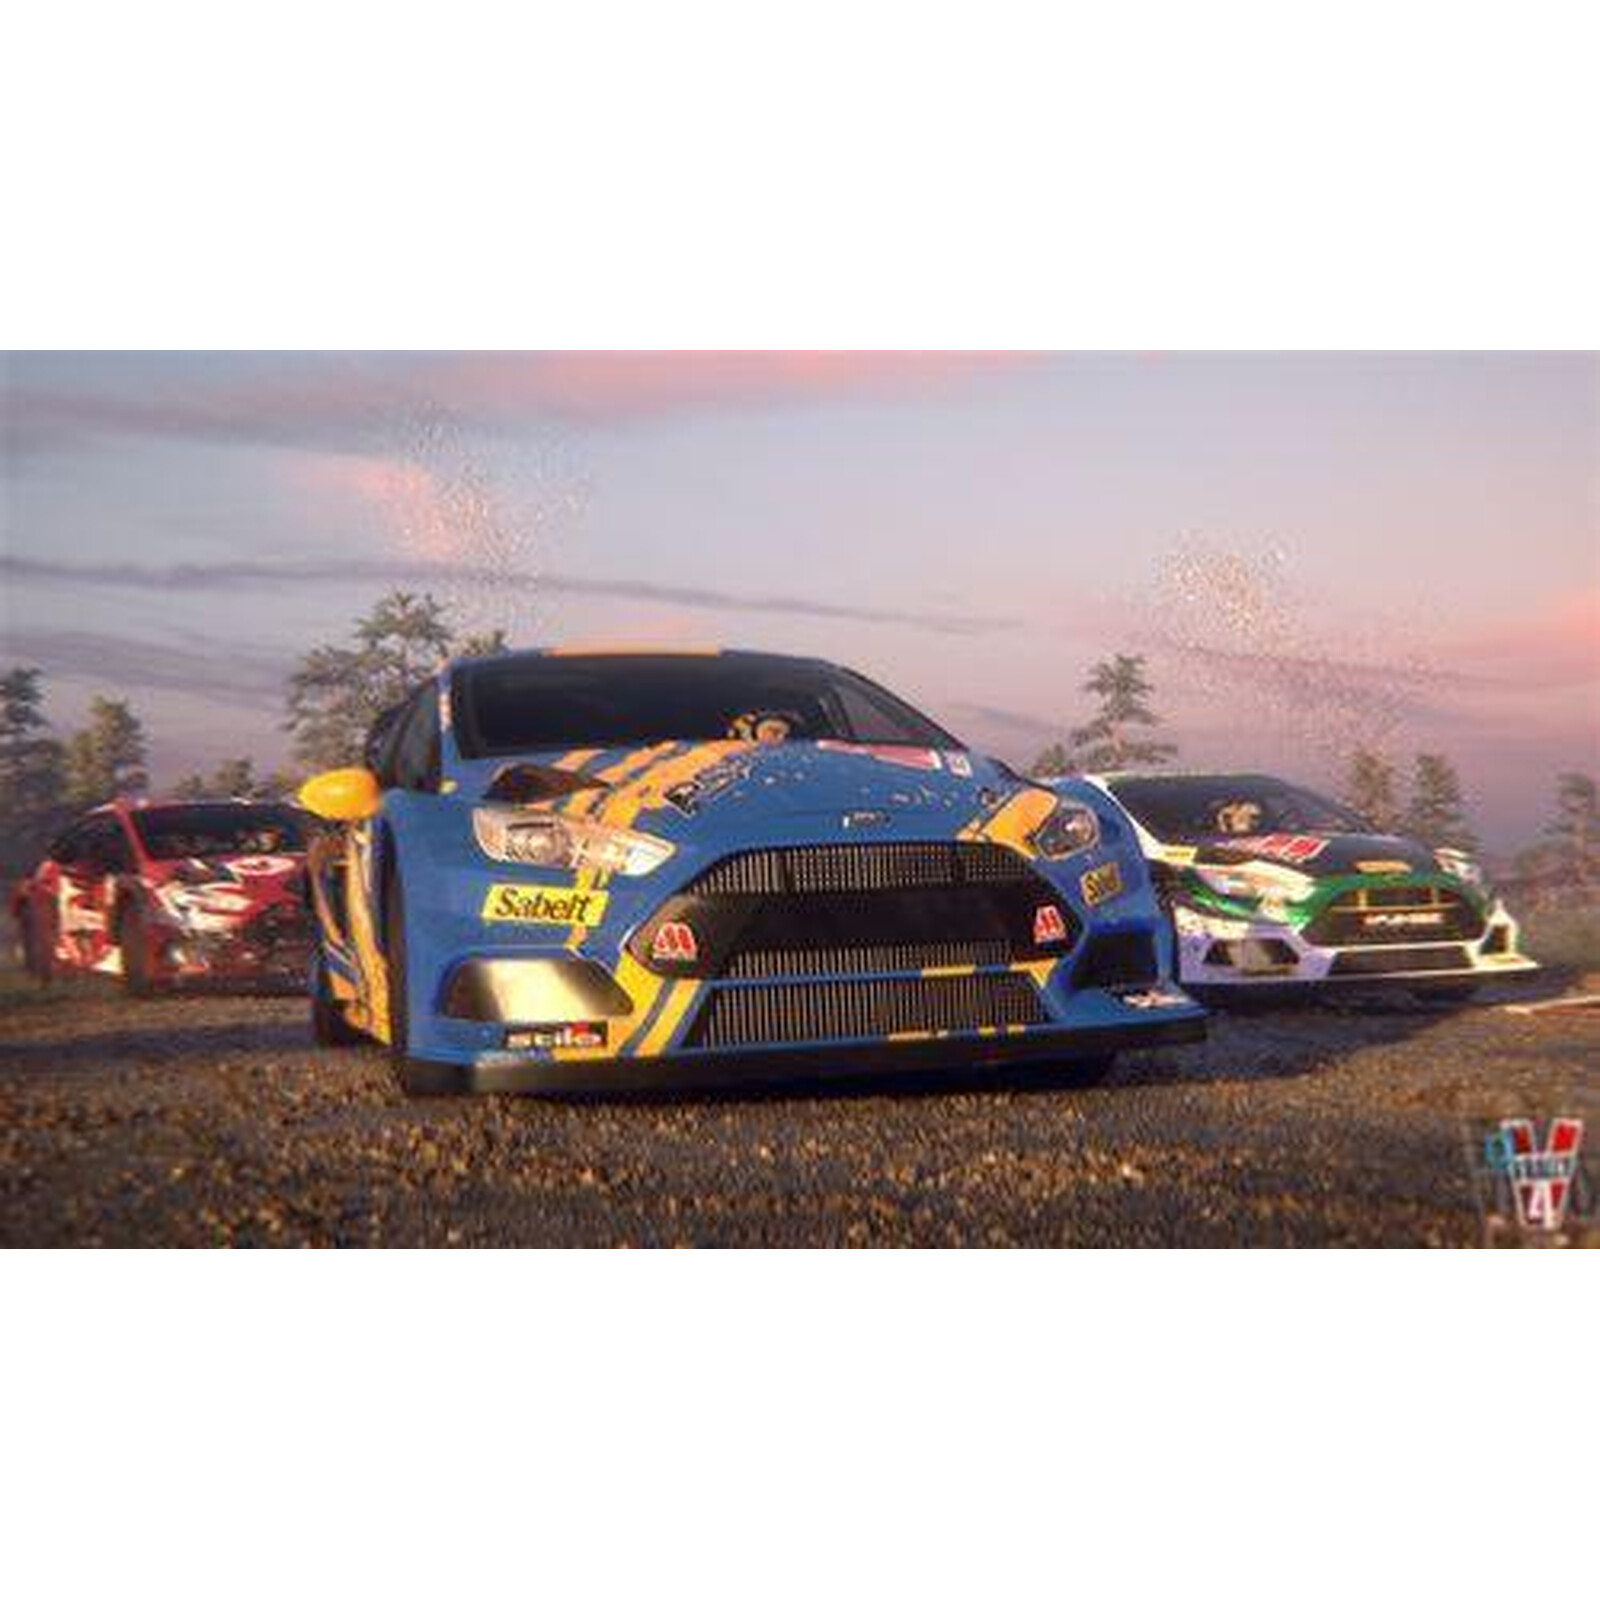 Need for Speed Rivals (PS4) - Jeux PS4 - LDLC